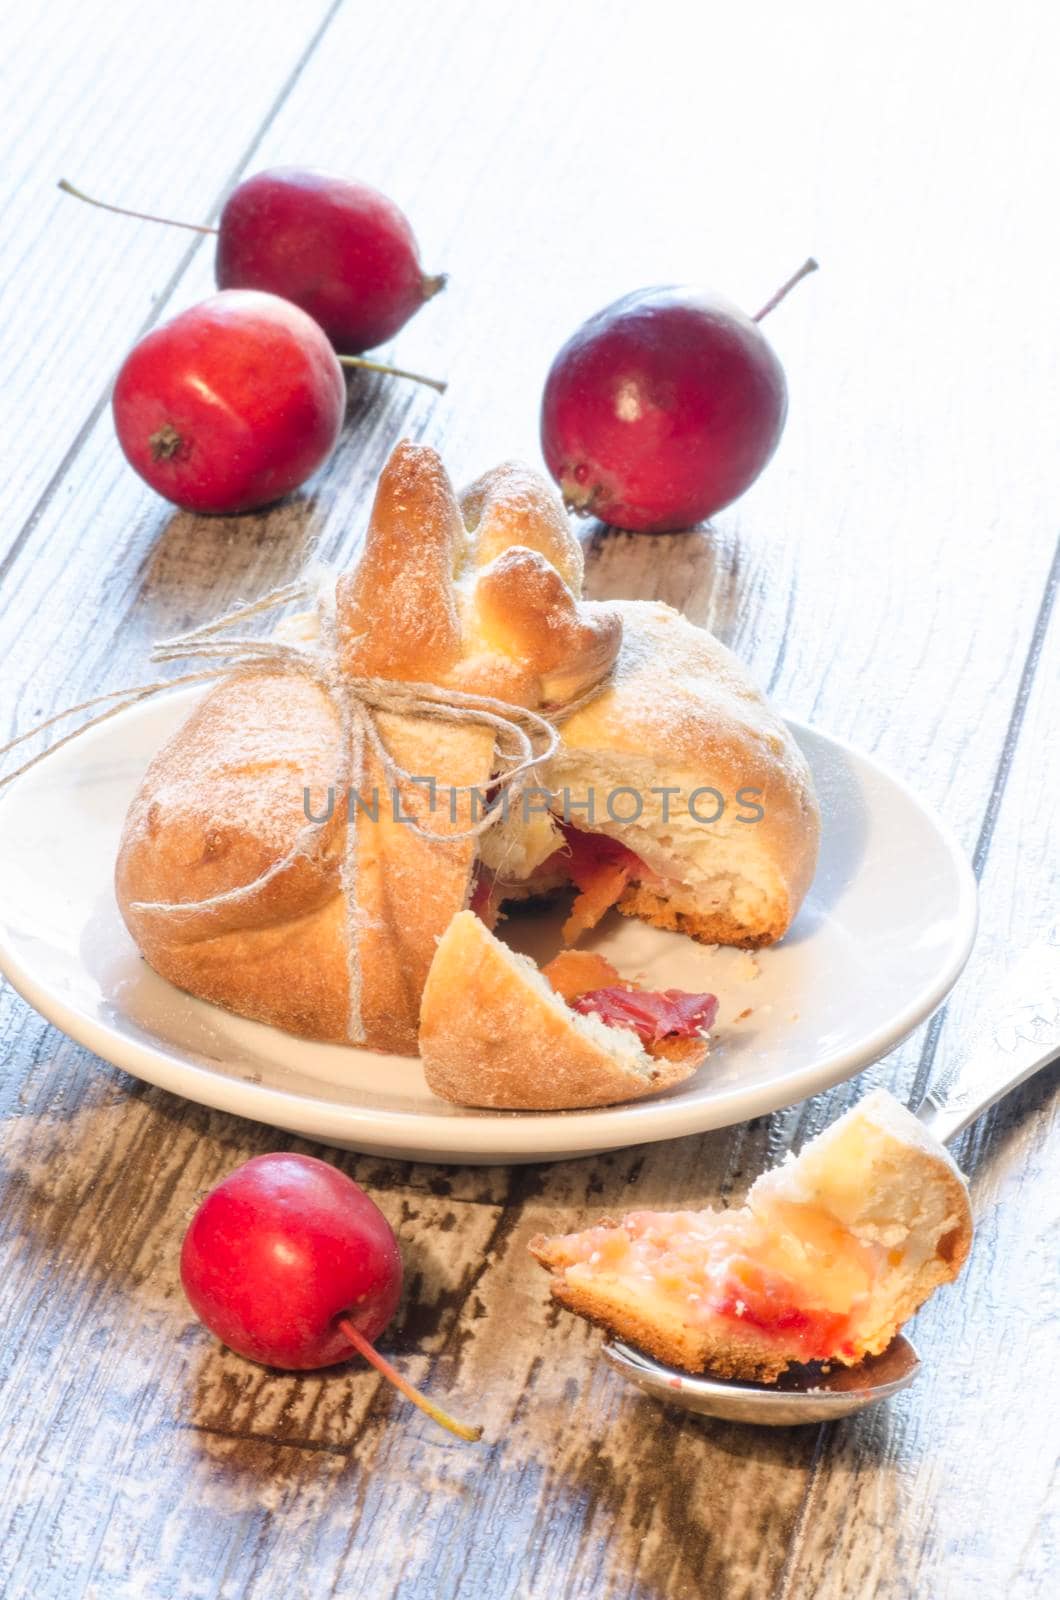 Paradise apples baked in pastry, in shape of bags. From series "Winter desserts"